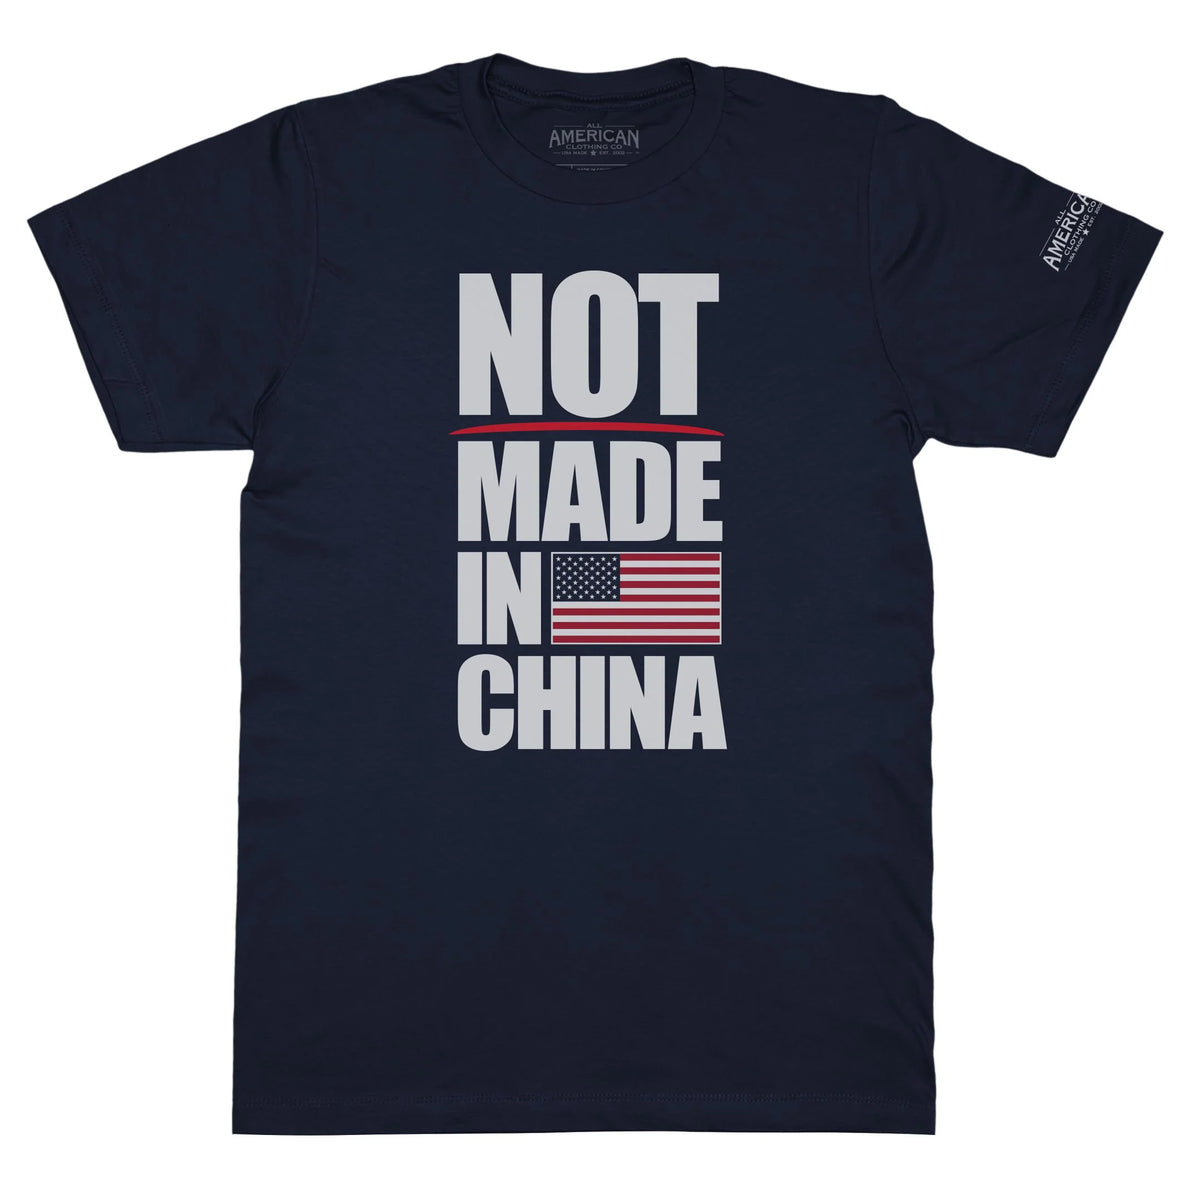 Not Made in China Graphic T-Shirt | All American Clothing - All ...